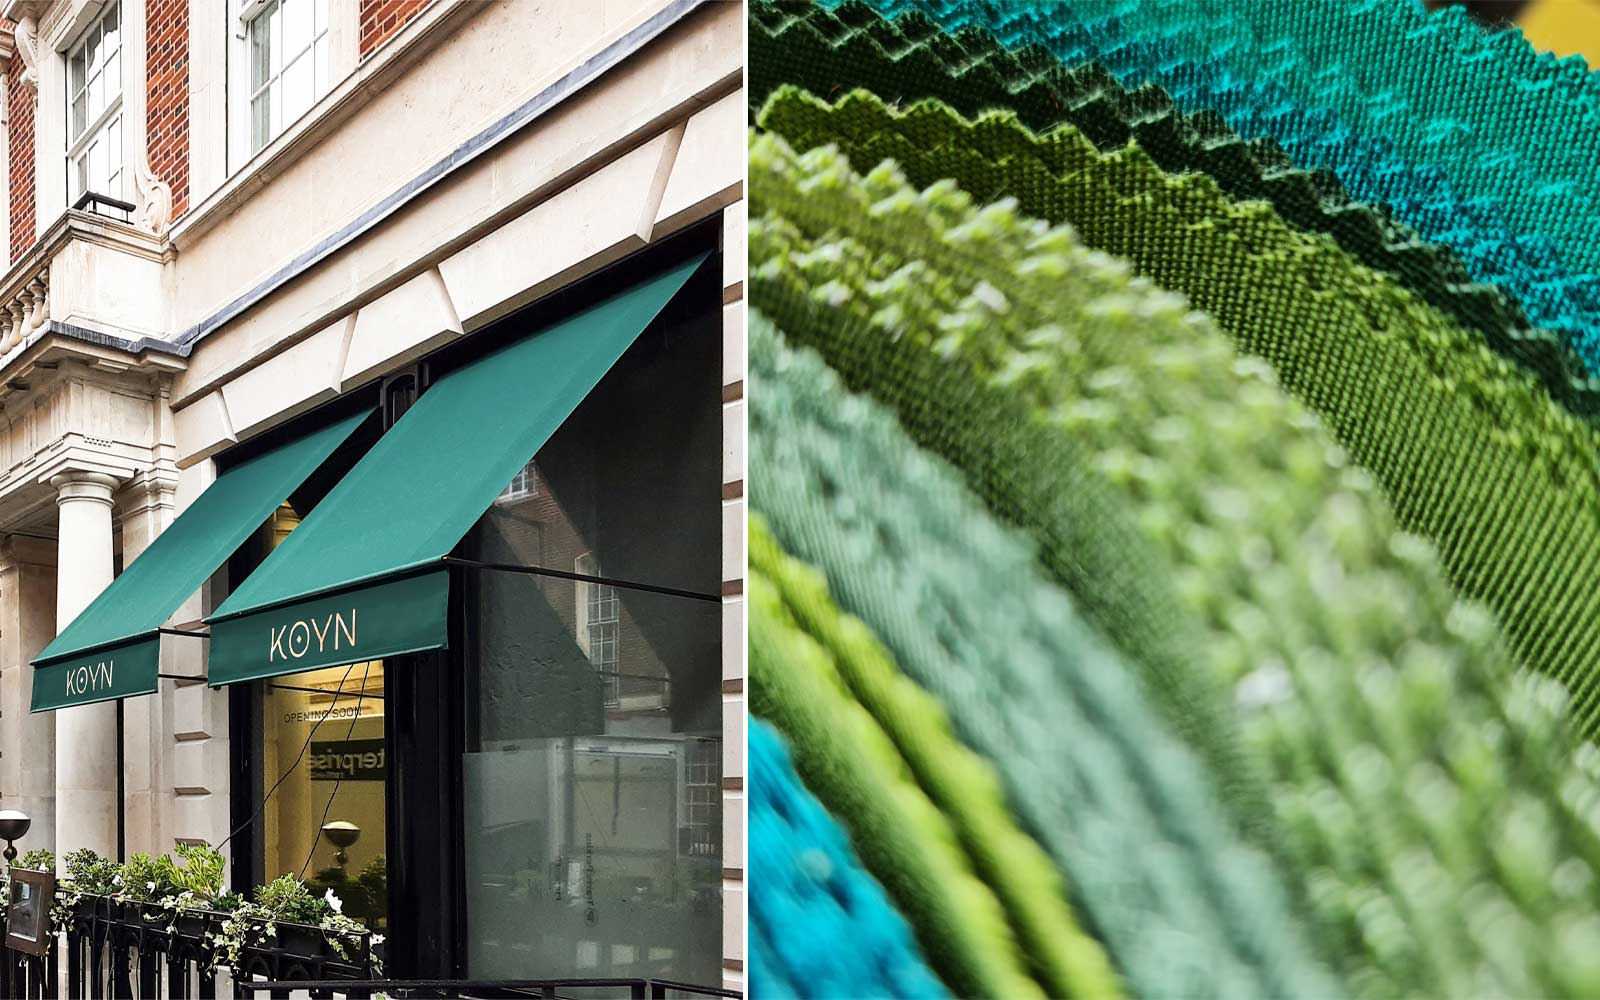  Shop Awning by Fabric